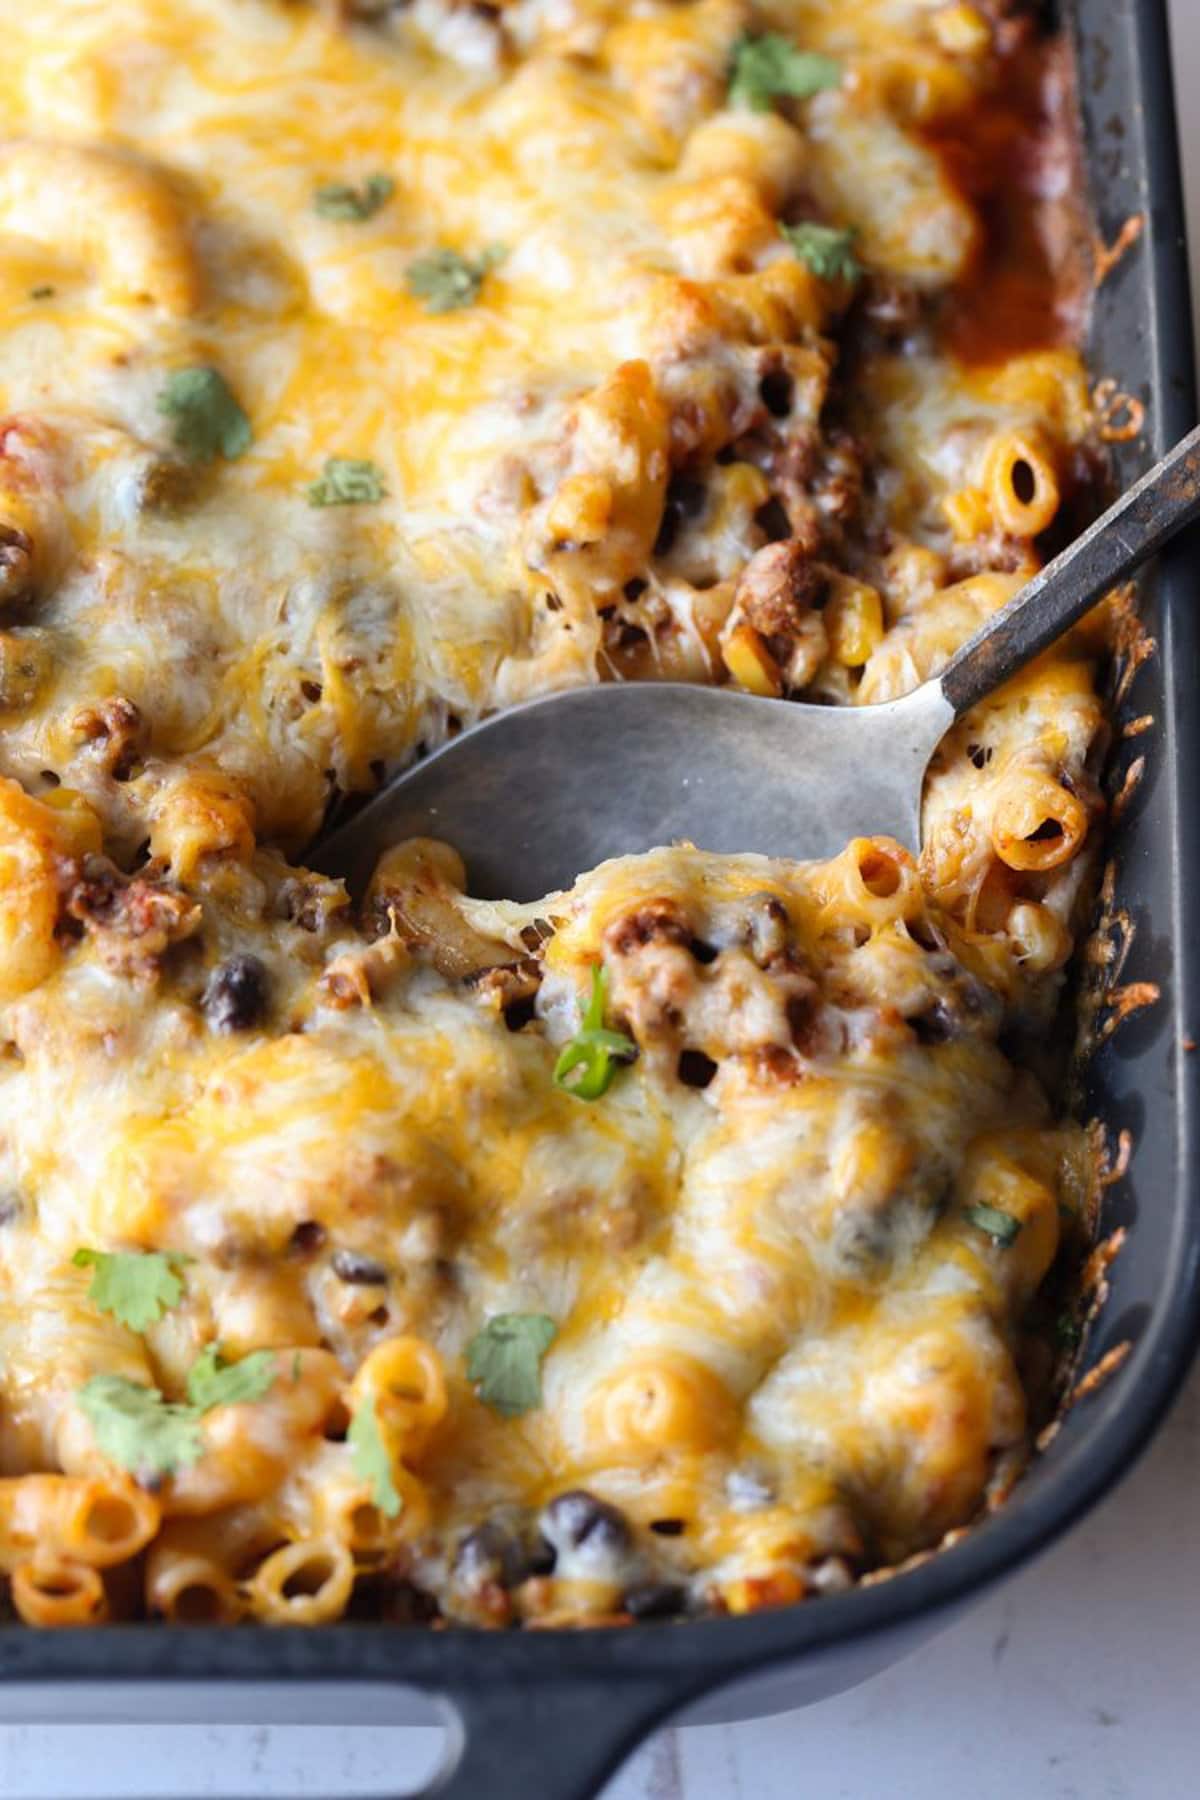 Baked chili mac and cheese in a black casserole dish with a spoon tucked into the corner.